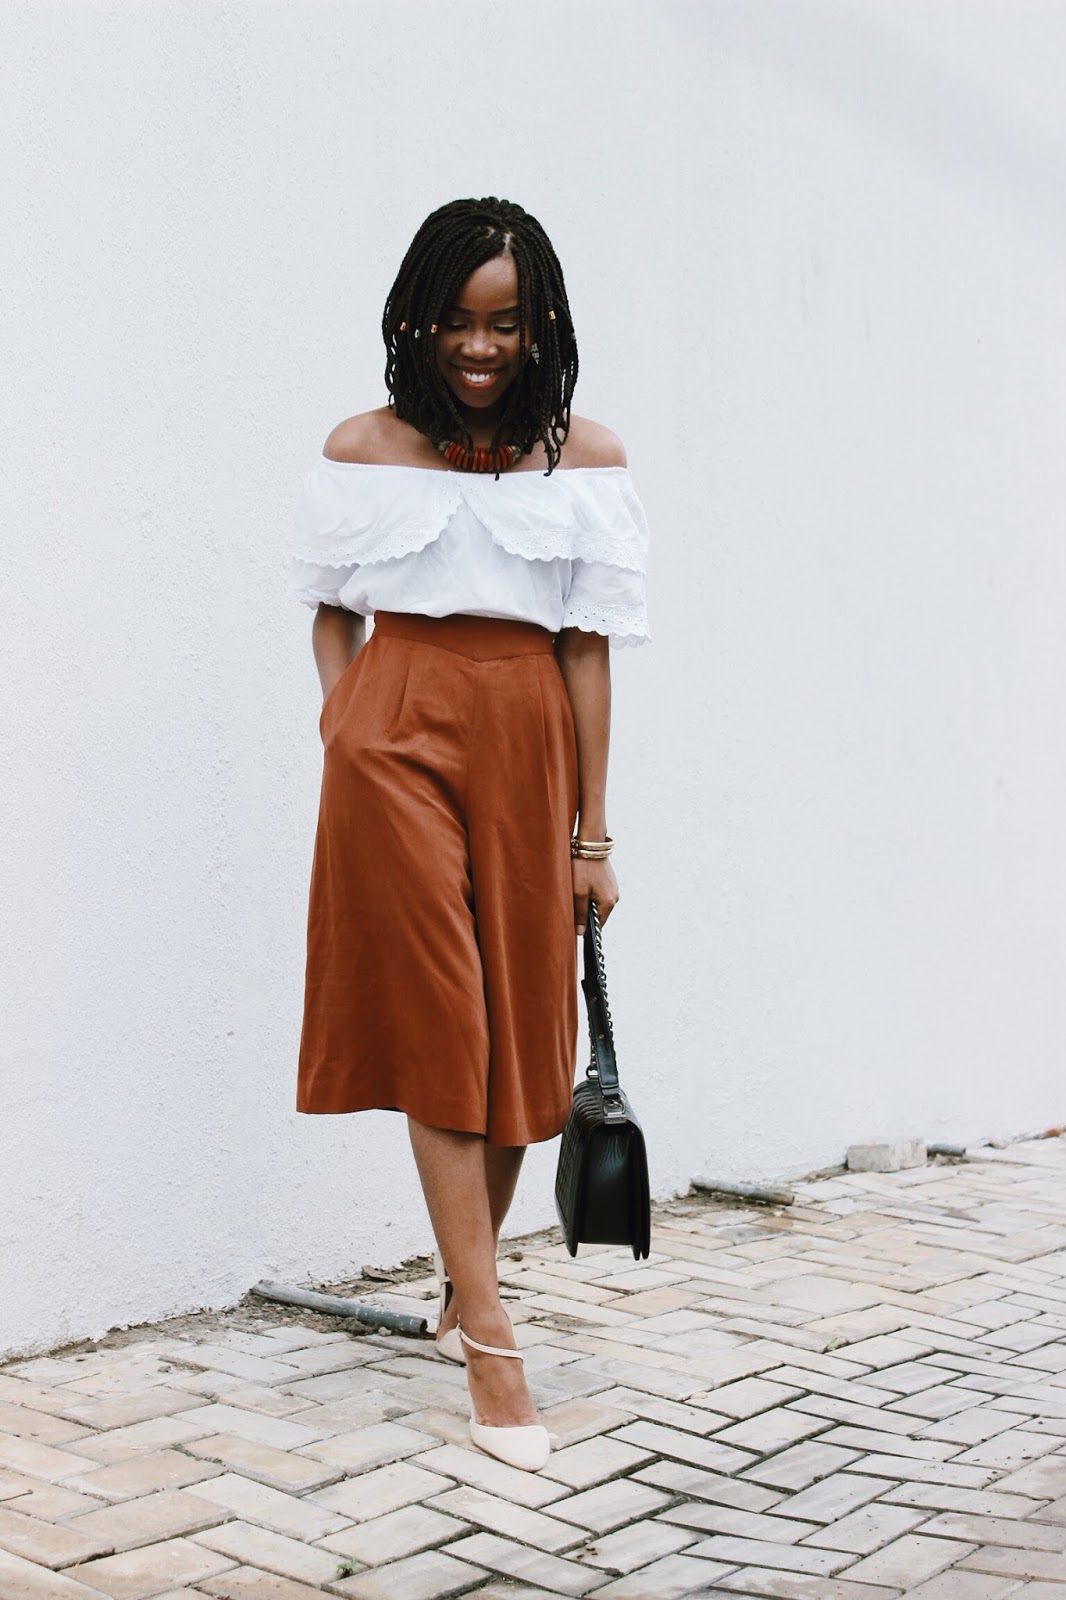 STYLING CULOTTES